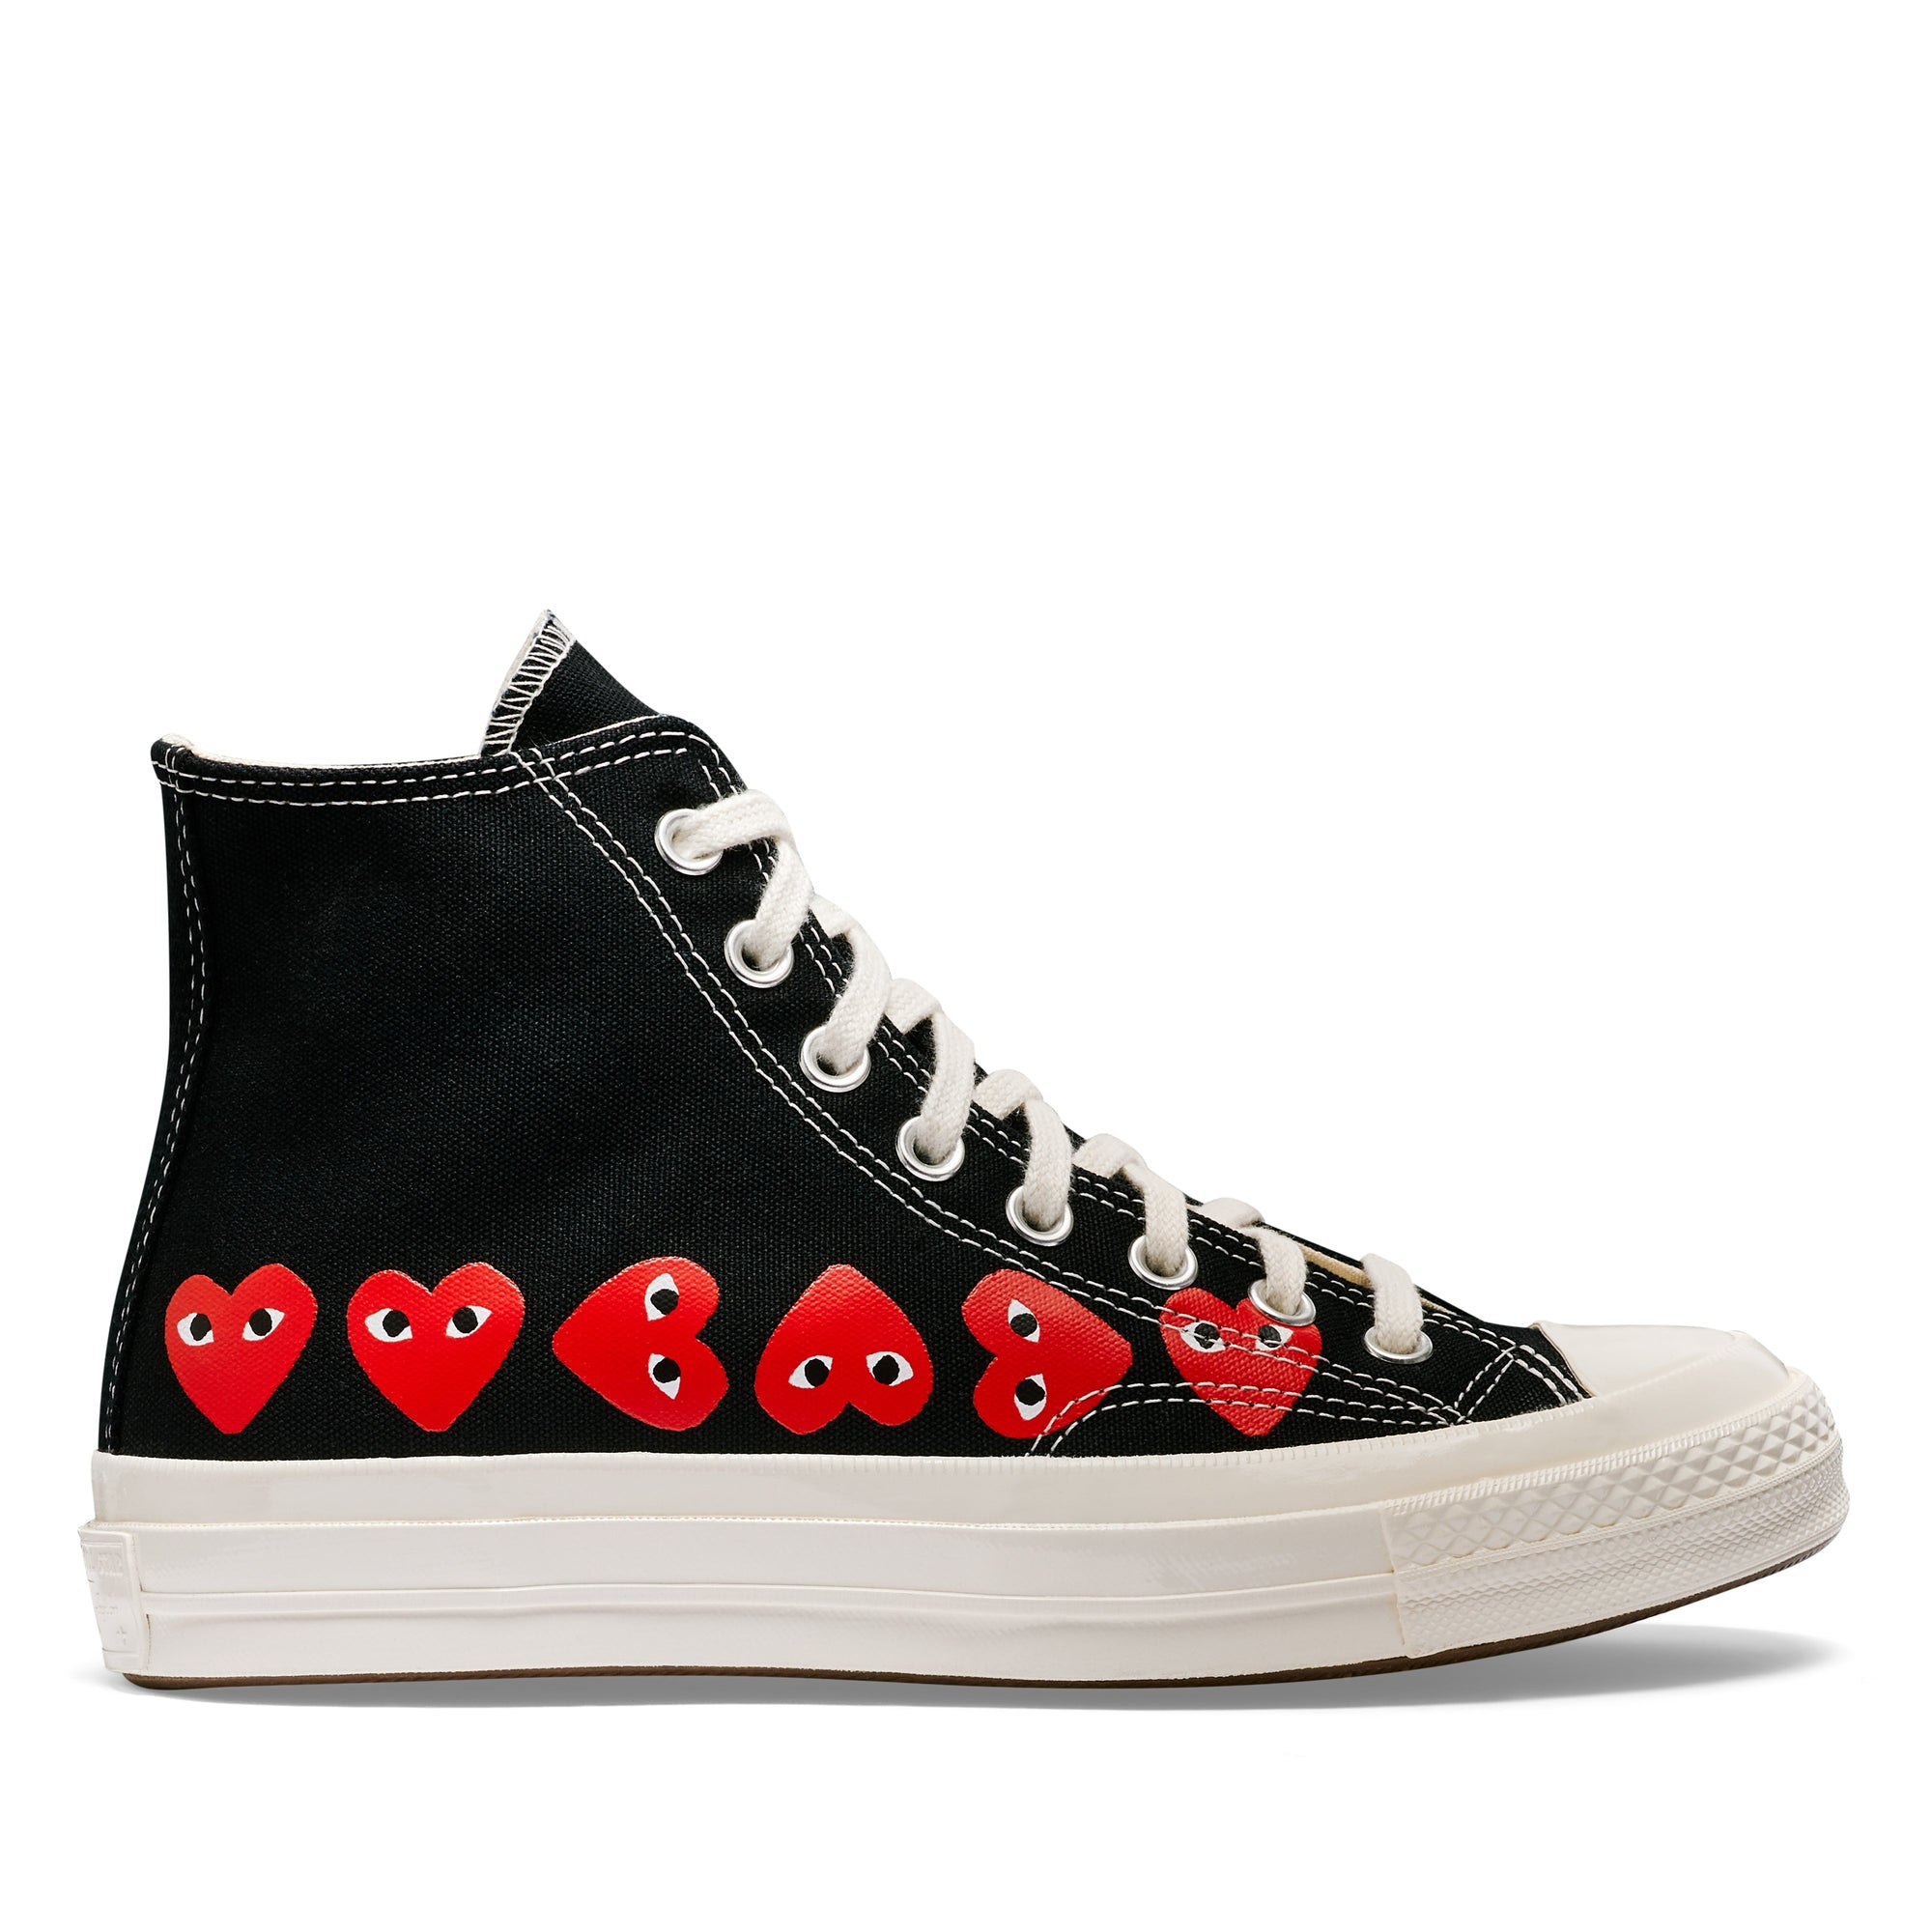 Play Converse - Multi Red Heart Chuck Taylor All Star '70 High Sneakers - (Black) view 1